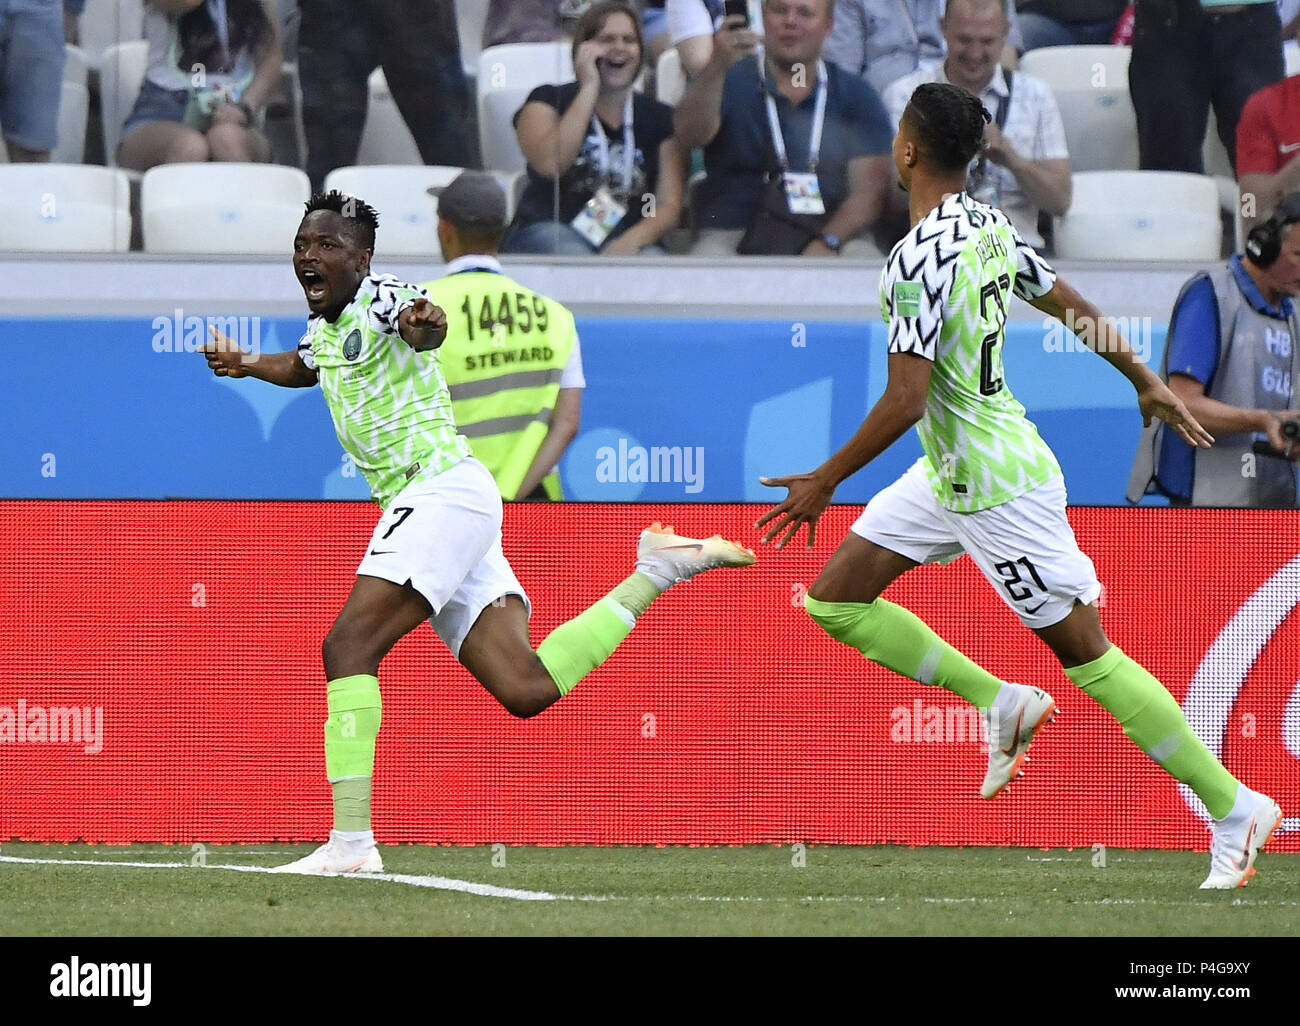 Volgograd, Russia. 22nd June, 2018. Ahmed Musa (L) of Nigeria celebrates scoring during the 2018 FIFA World Cup Group D match between Nigeria and Iceland in Volgograd, Russia, June 22, 2018. Credit: He Canling/Xinhua/Alamy Live News Stock Photo